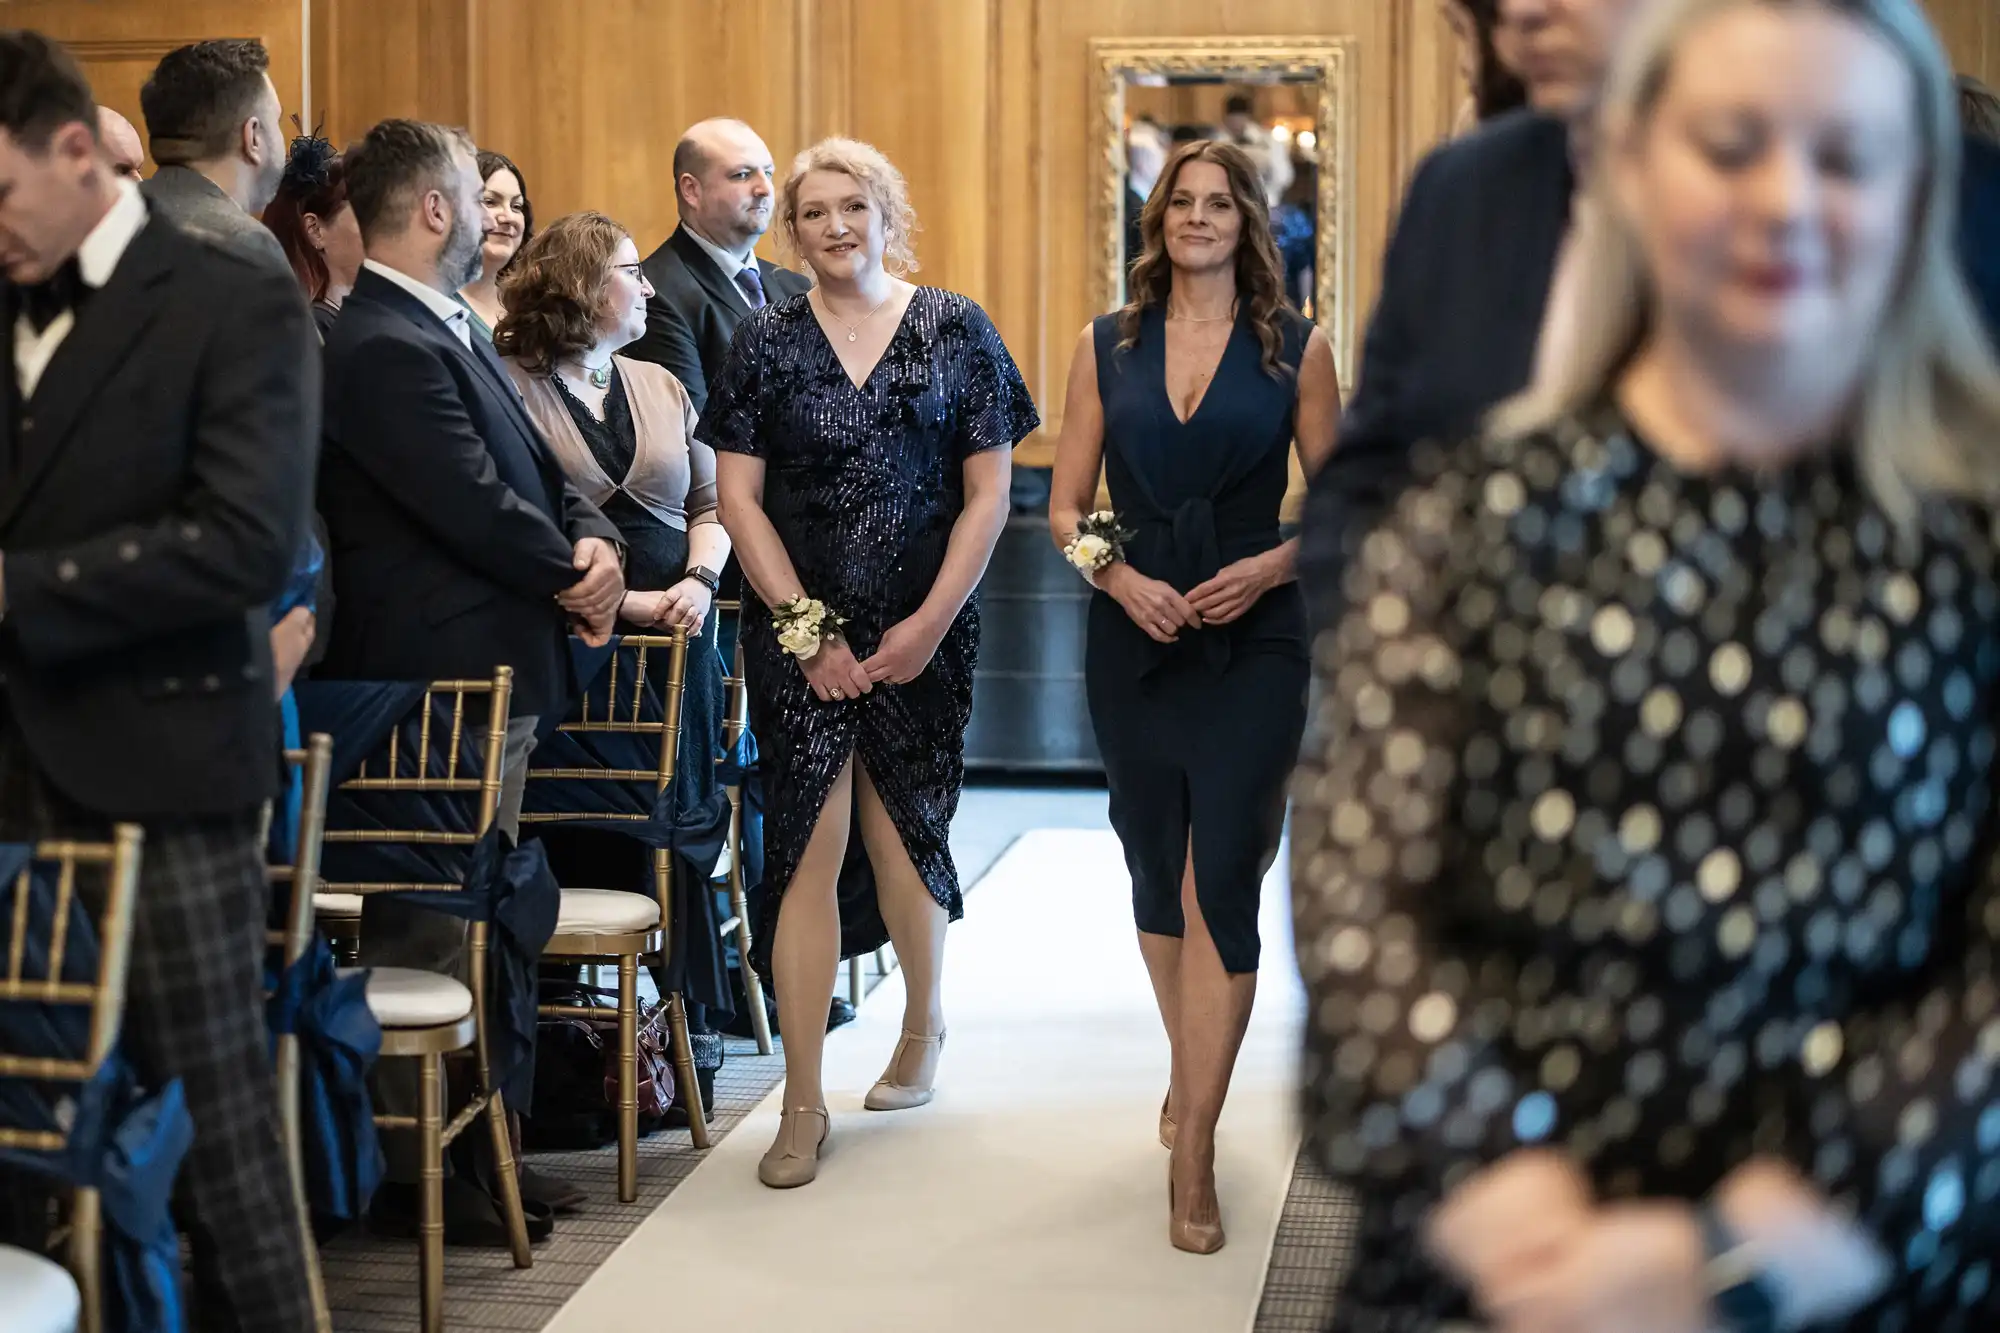 Two women walk down an aisle during a formal event, while guests seated on either side watch. The surroundings feature wooden paneling and elegant decor.